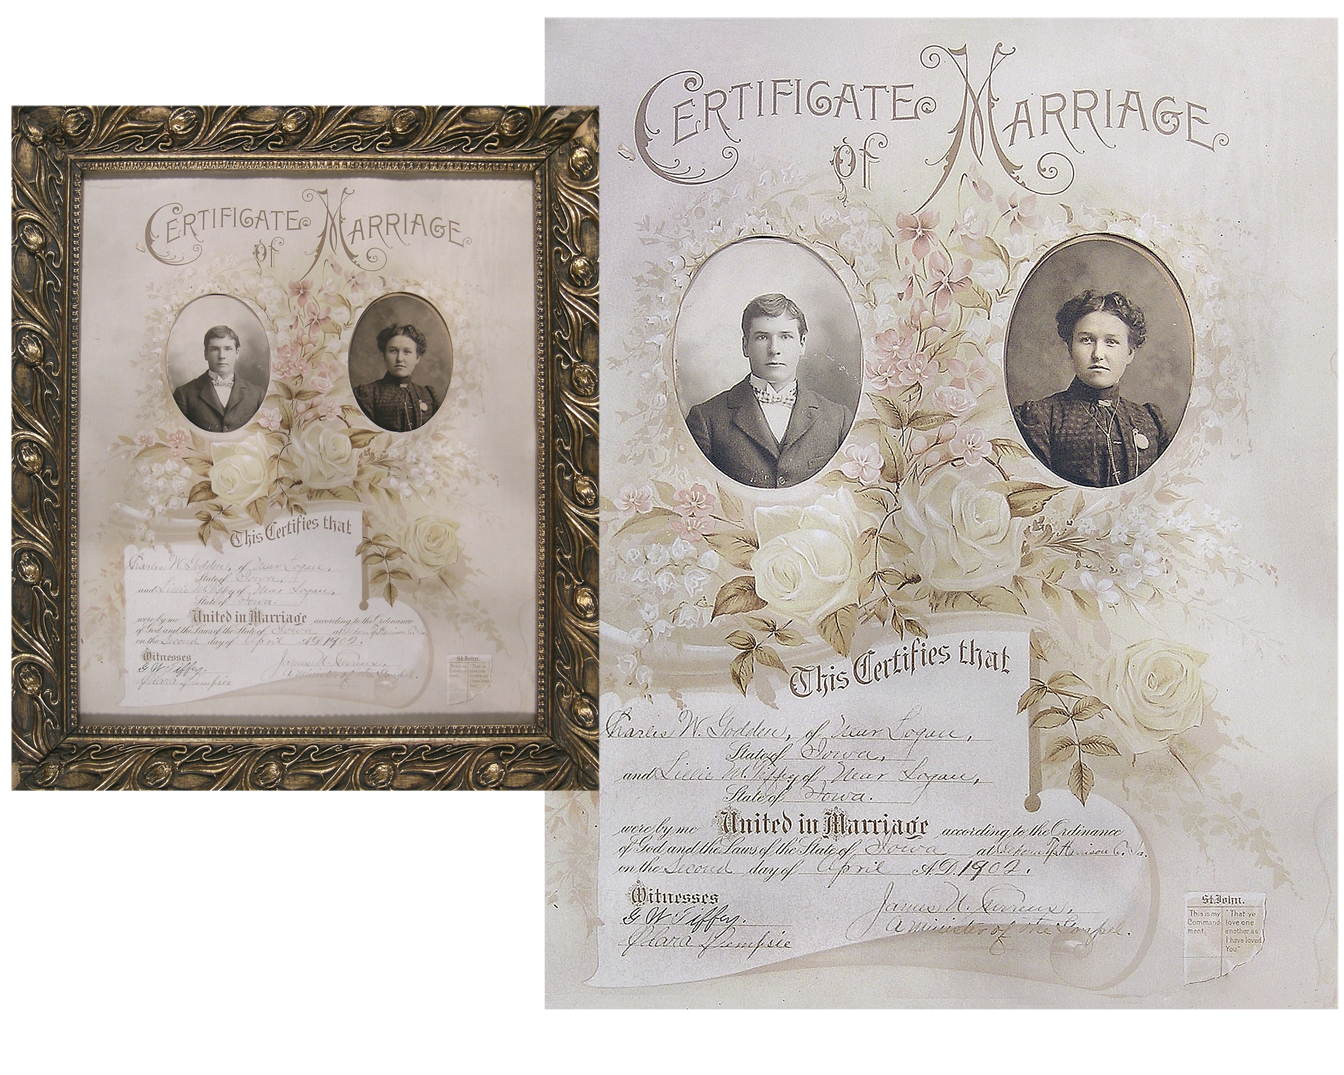 Wedding Certificate permission to use by Godden sample CBW